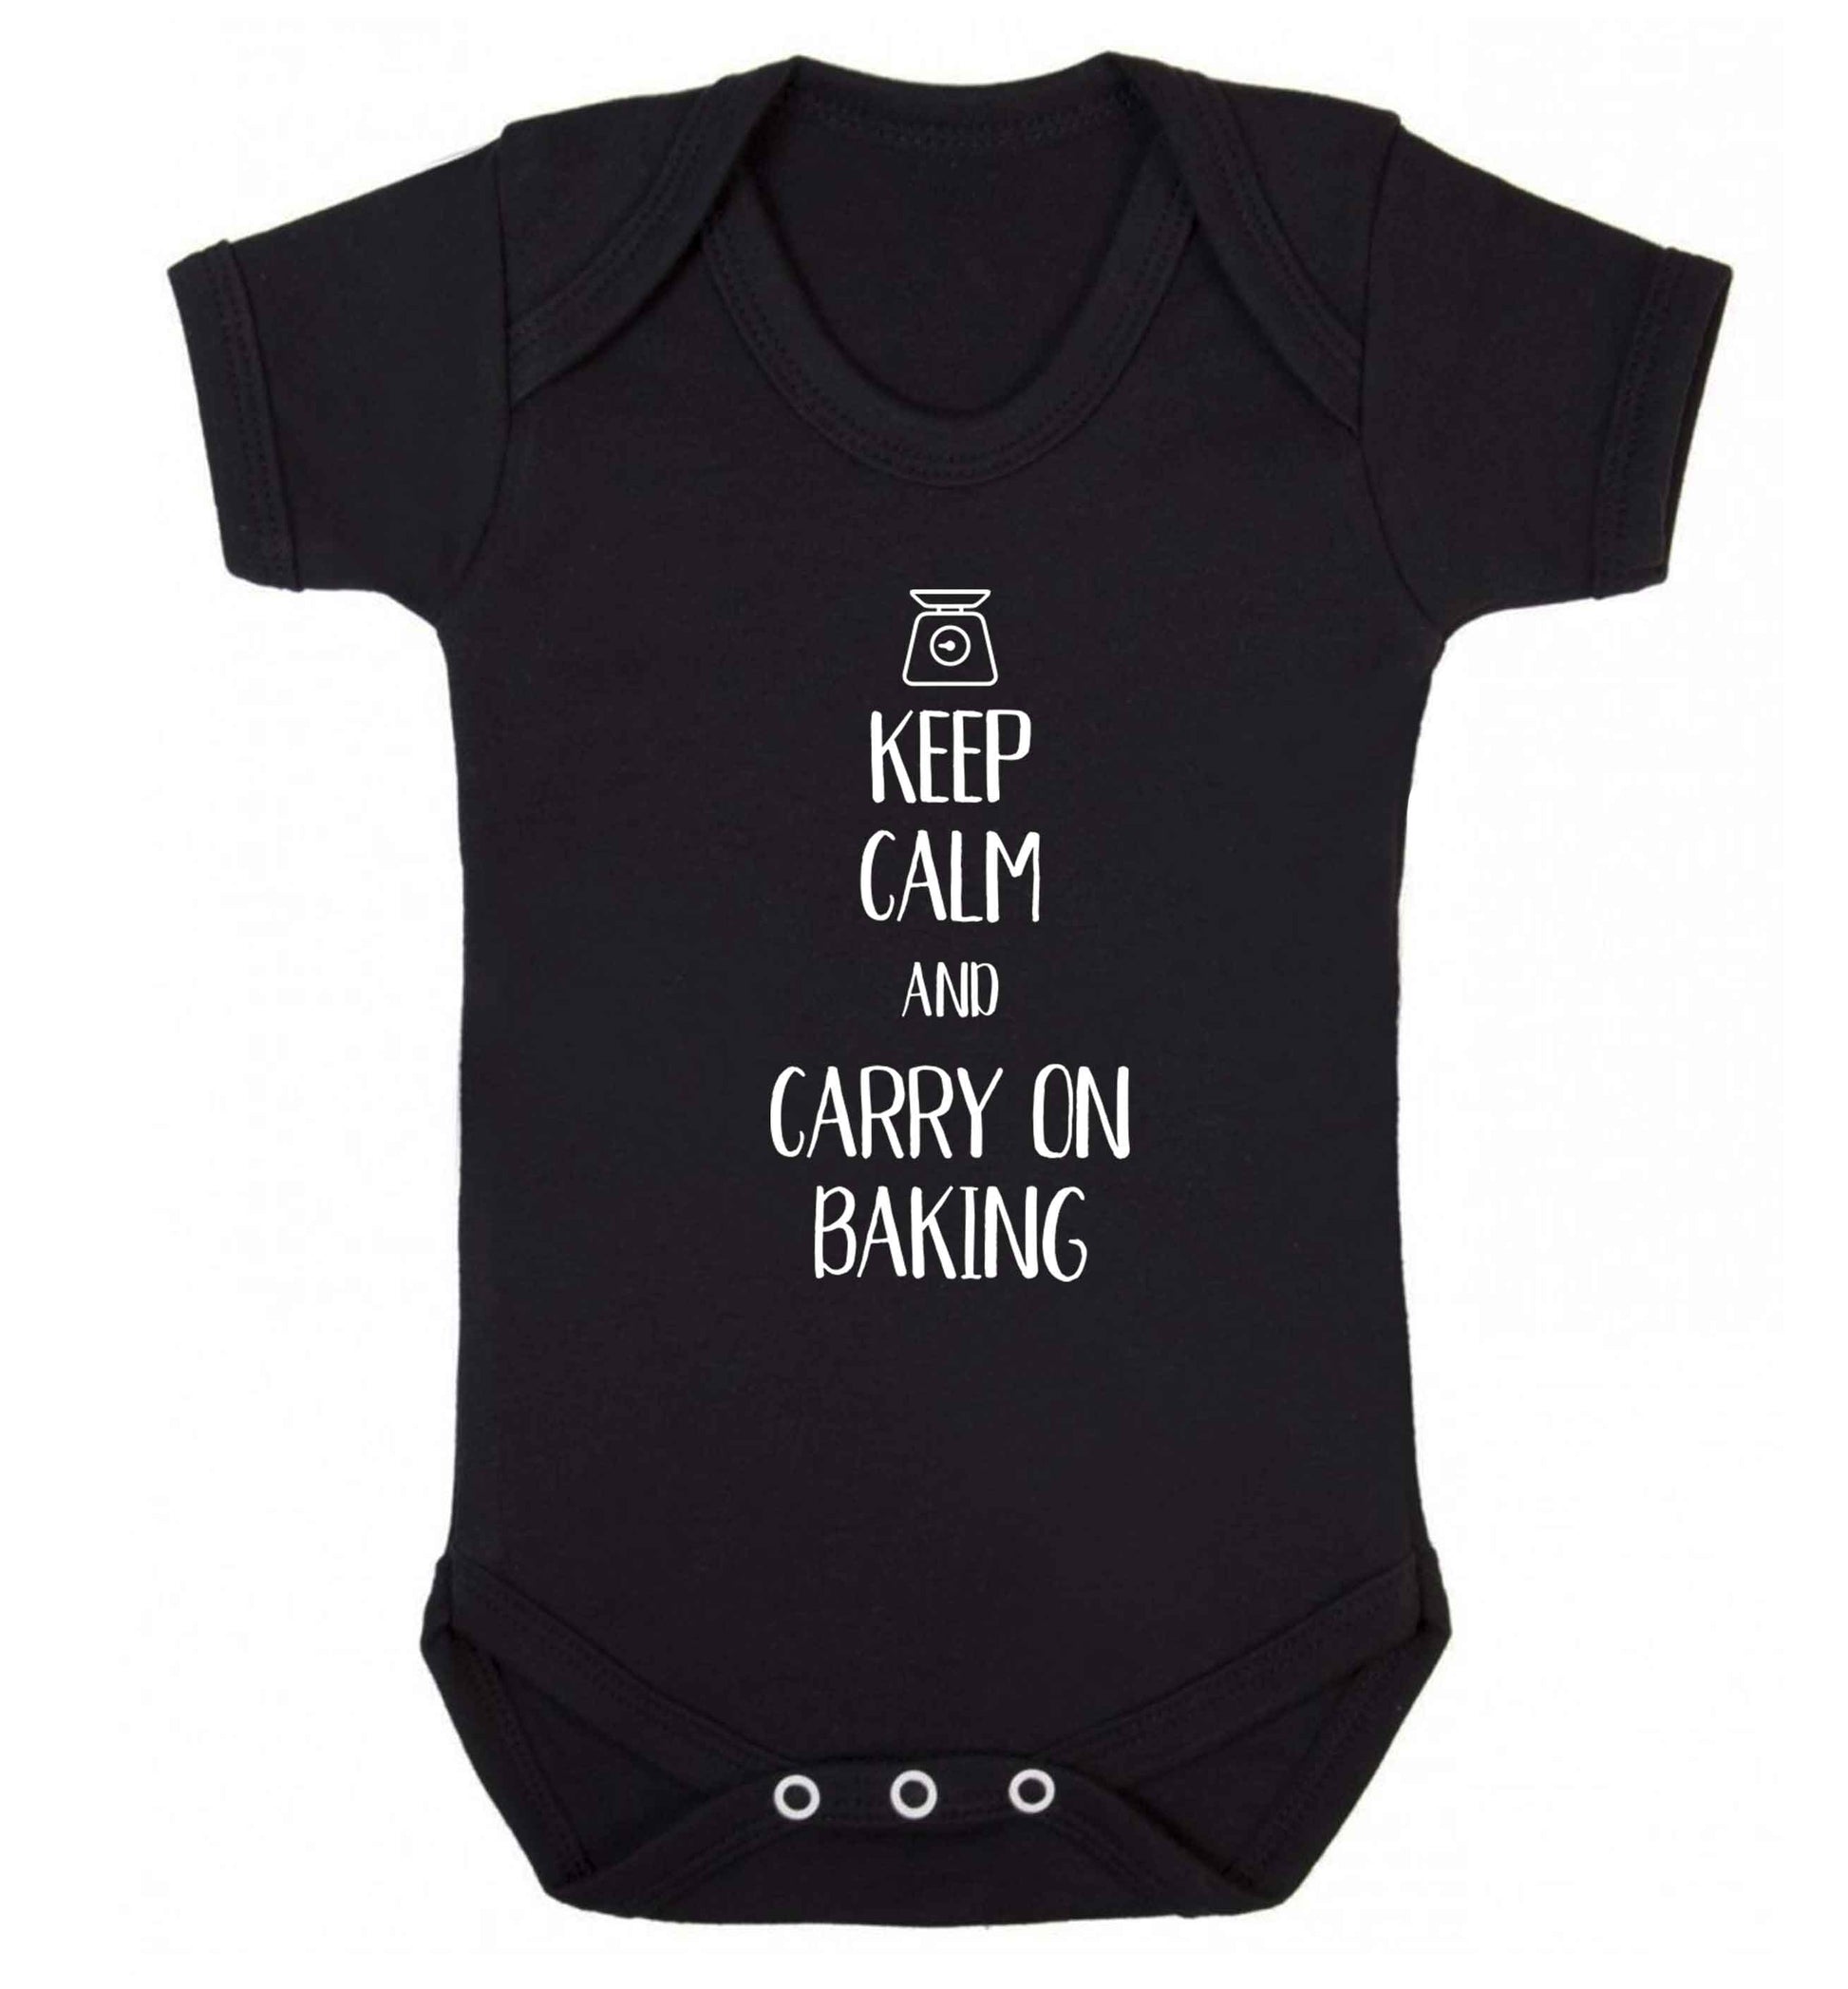 Keep calm and carry on baking Baby Vest black 18-24 months